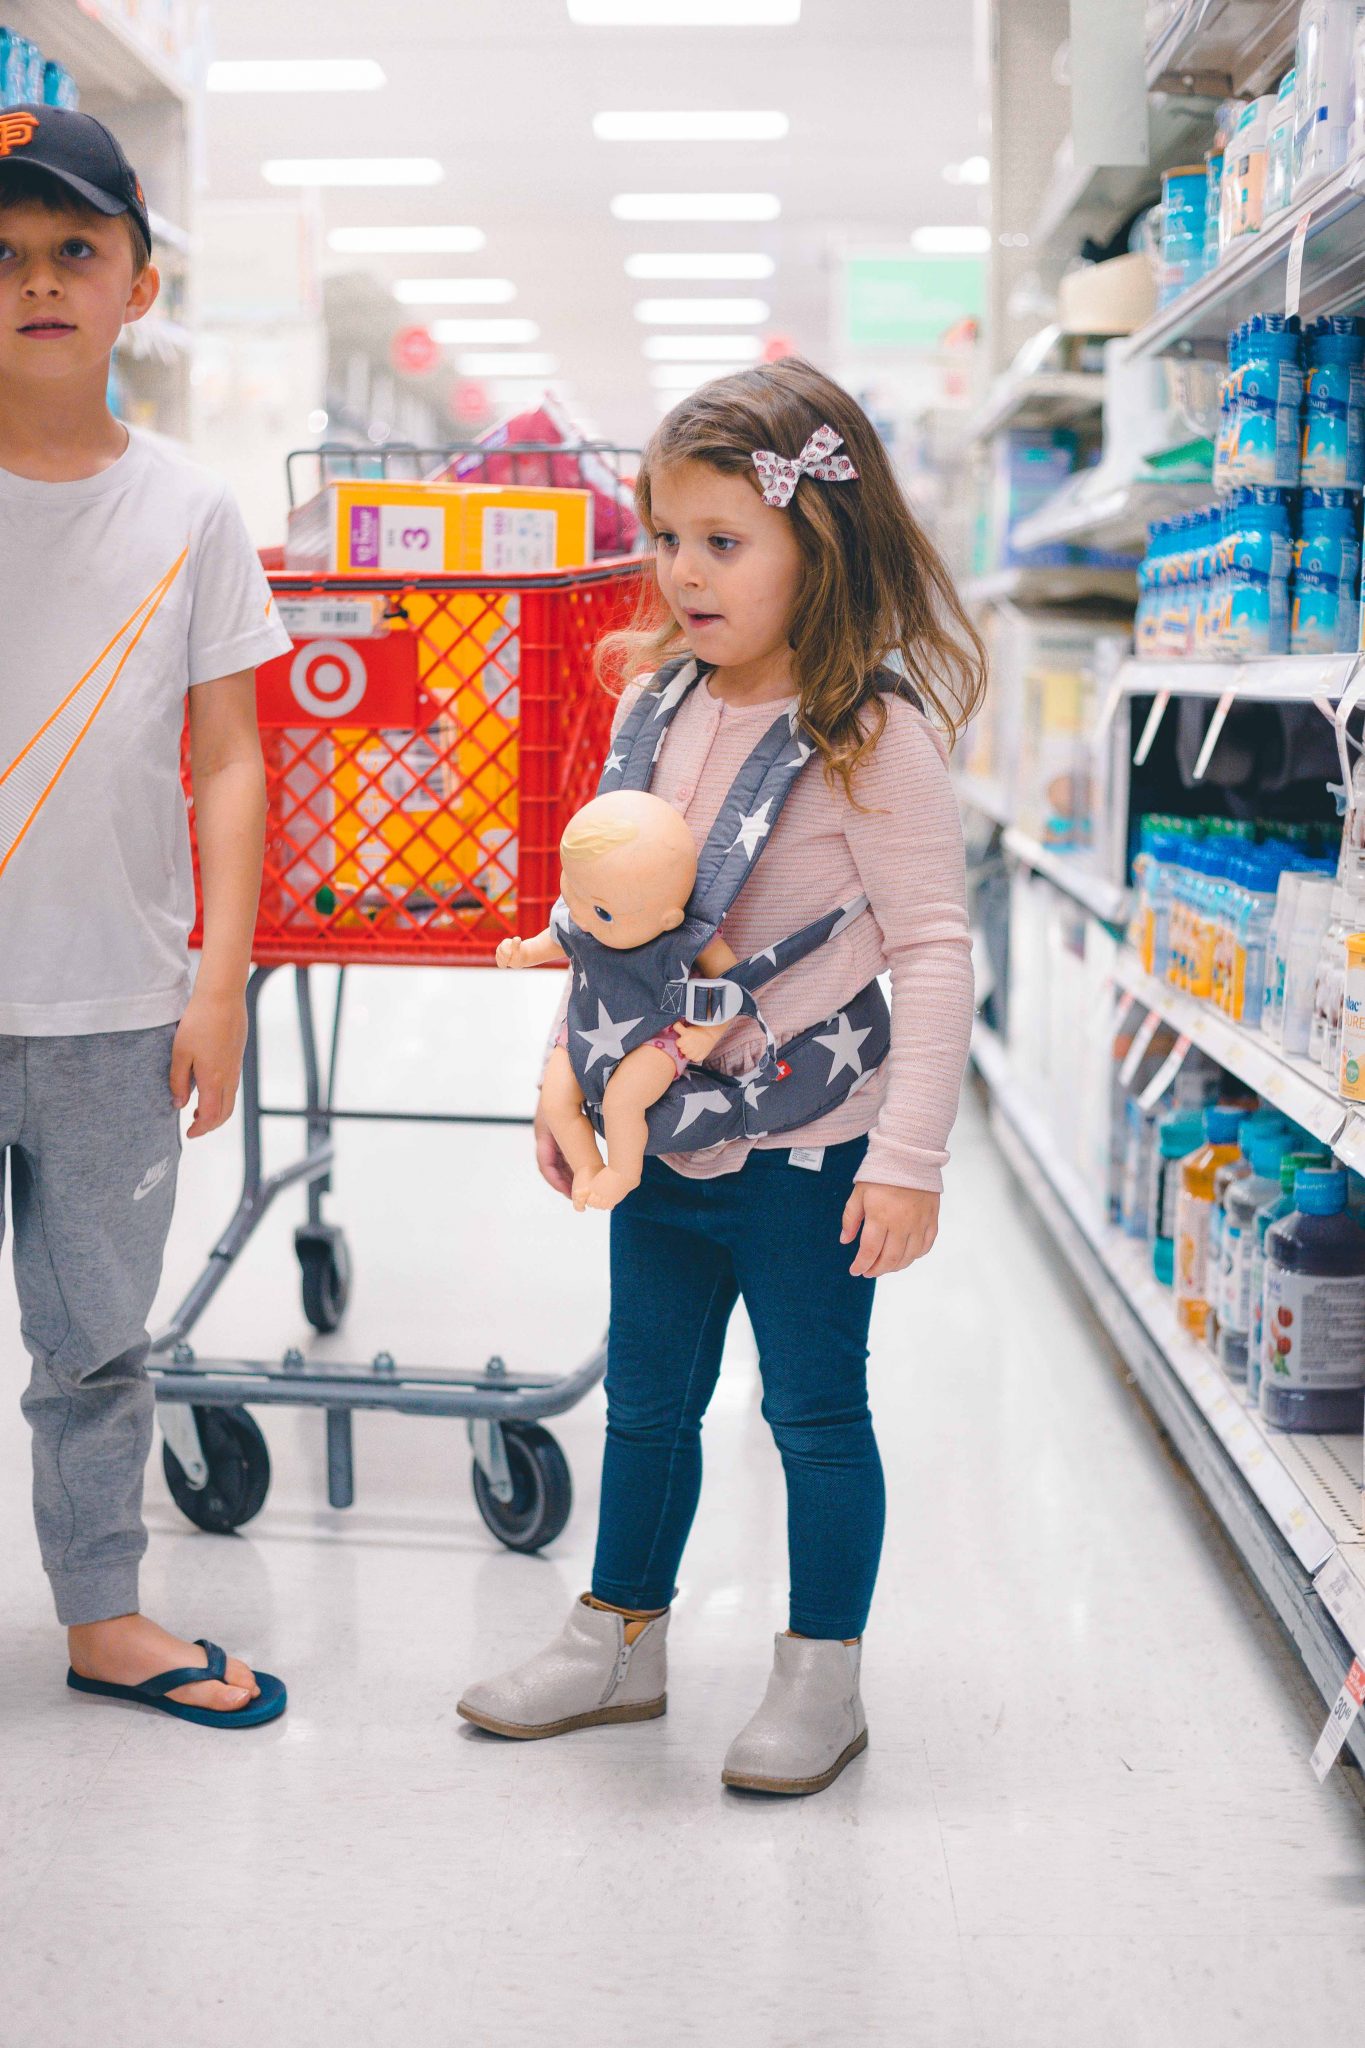 3 Tips for Grocery Shopping with Kids by San Francisco lifestyle blogger The Girl in The Yellow Dress